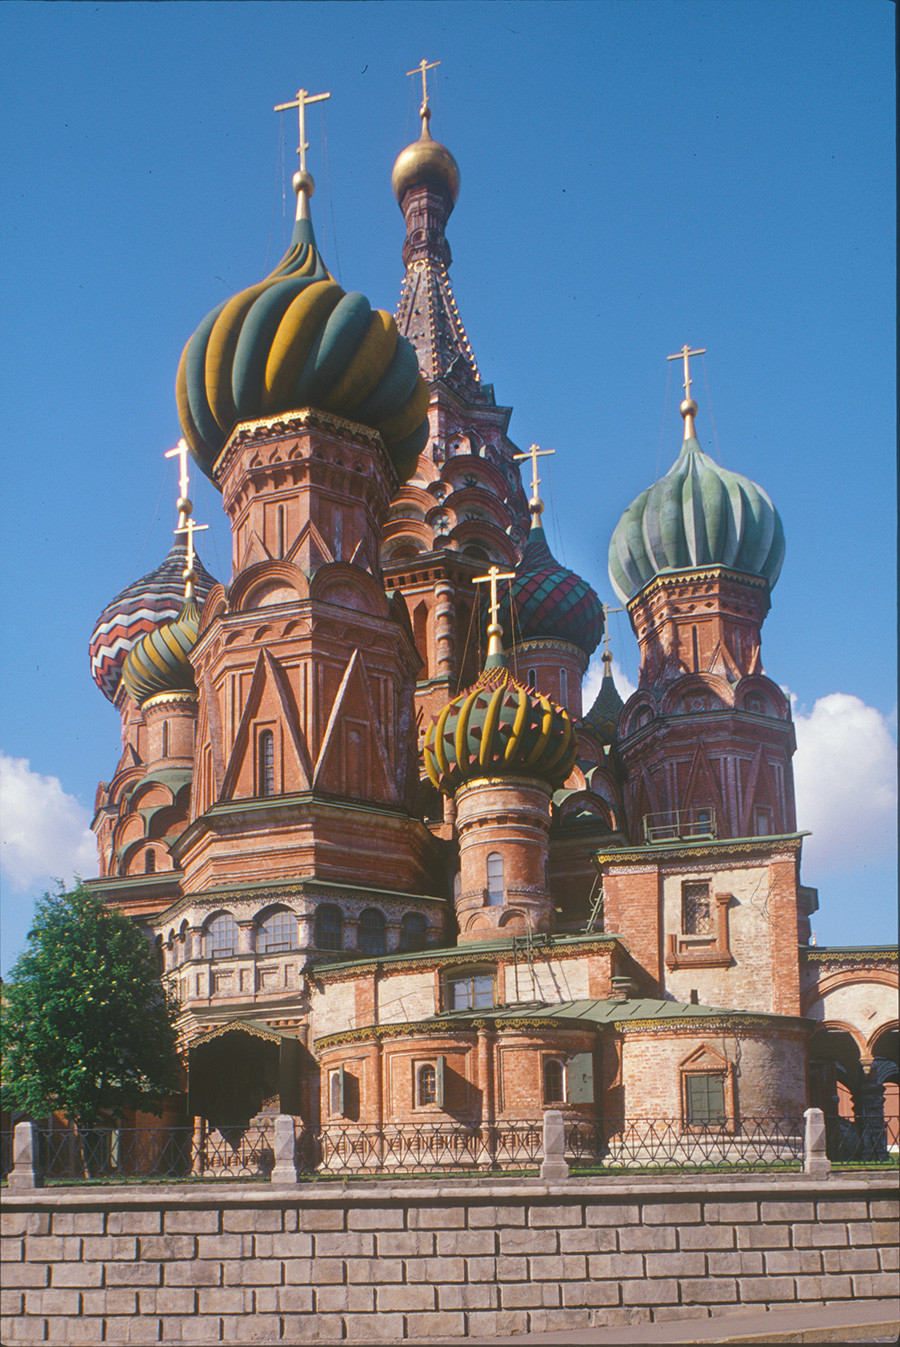 St. Basil's. Northeast view. From left center: Trinity Church, Church of Basil the Blessed, Church of Three Patriarchs (in shadow), Church of Sts. Cyprian & Justina. Background: Tower of Church of the Intercession. August 6, 1987